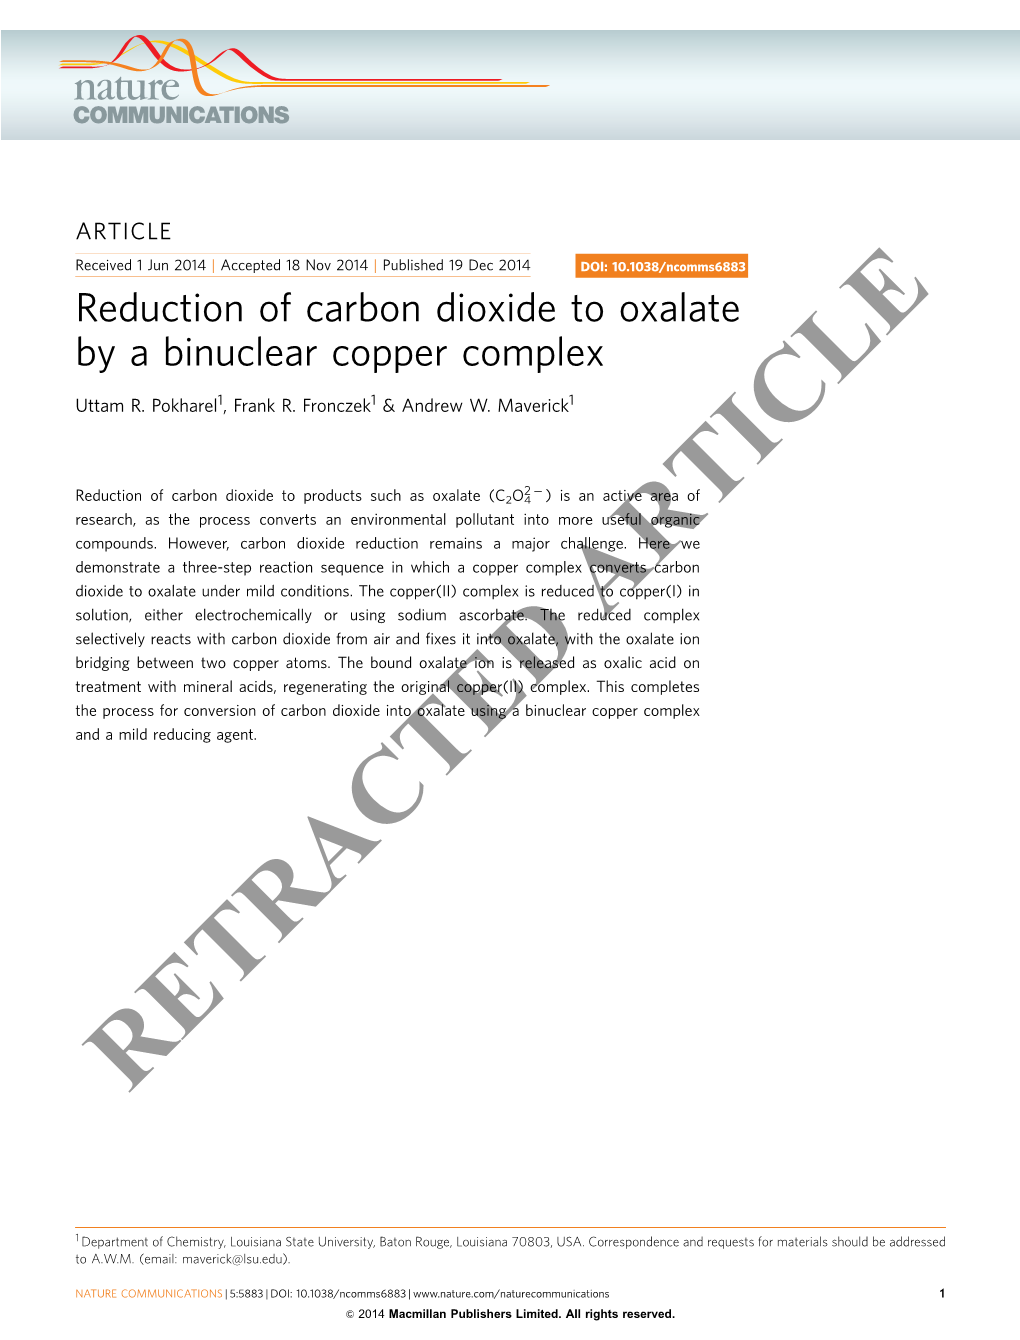 Reduction of Carbon Dioxide to Oxalate by a Binuclear Copper Complex